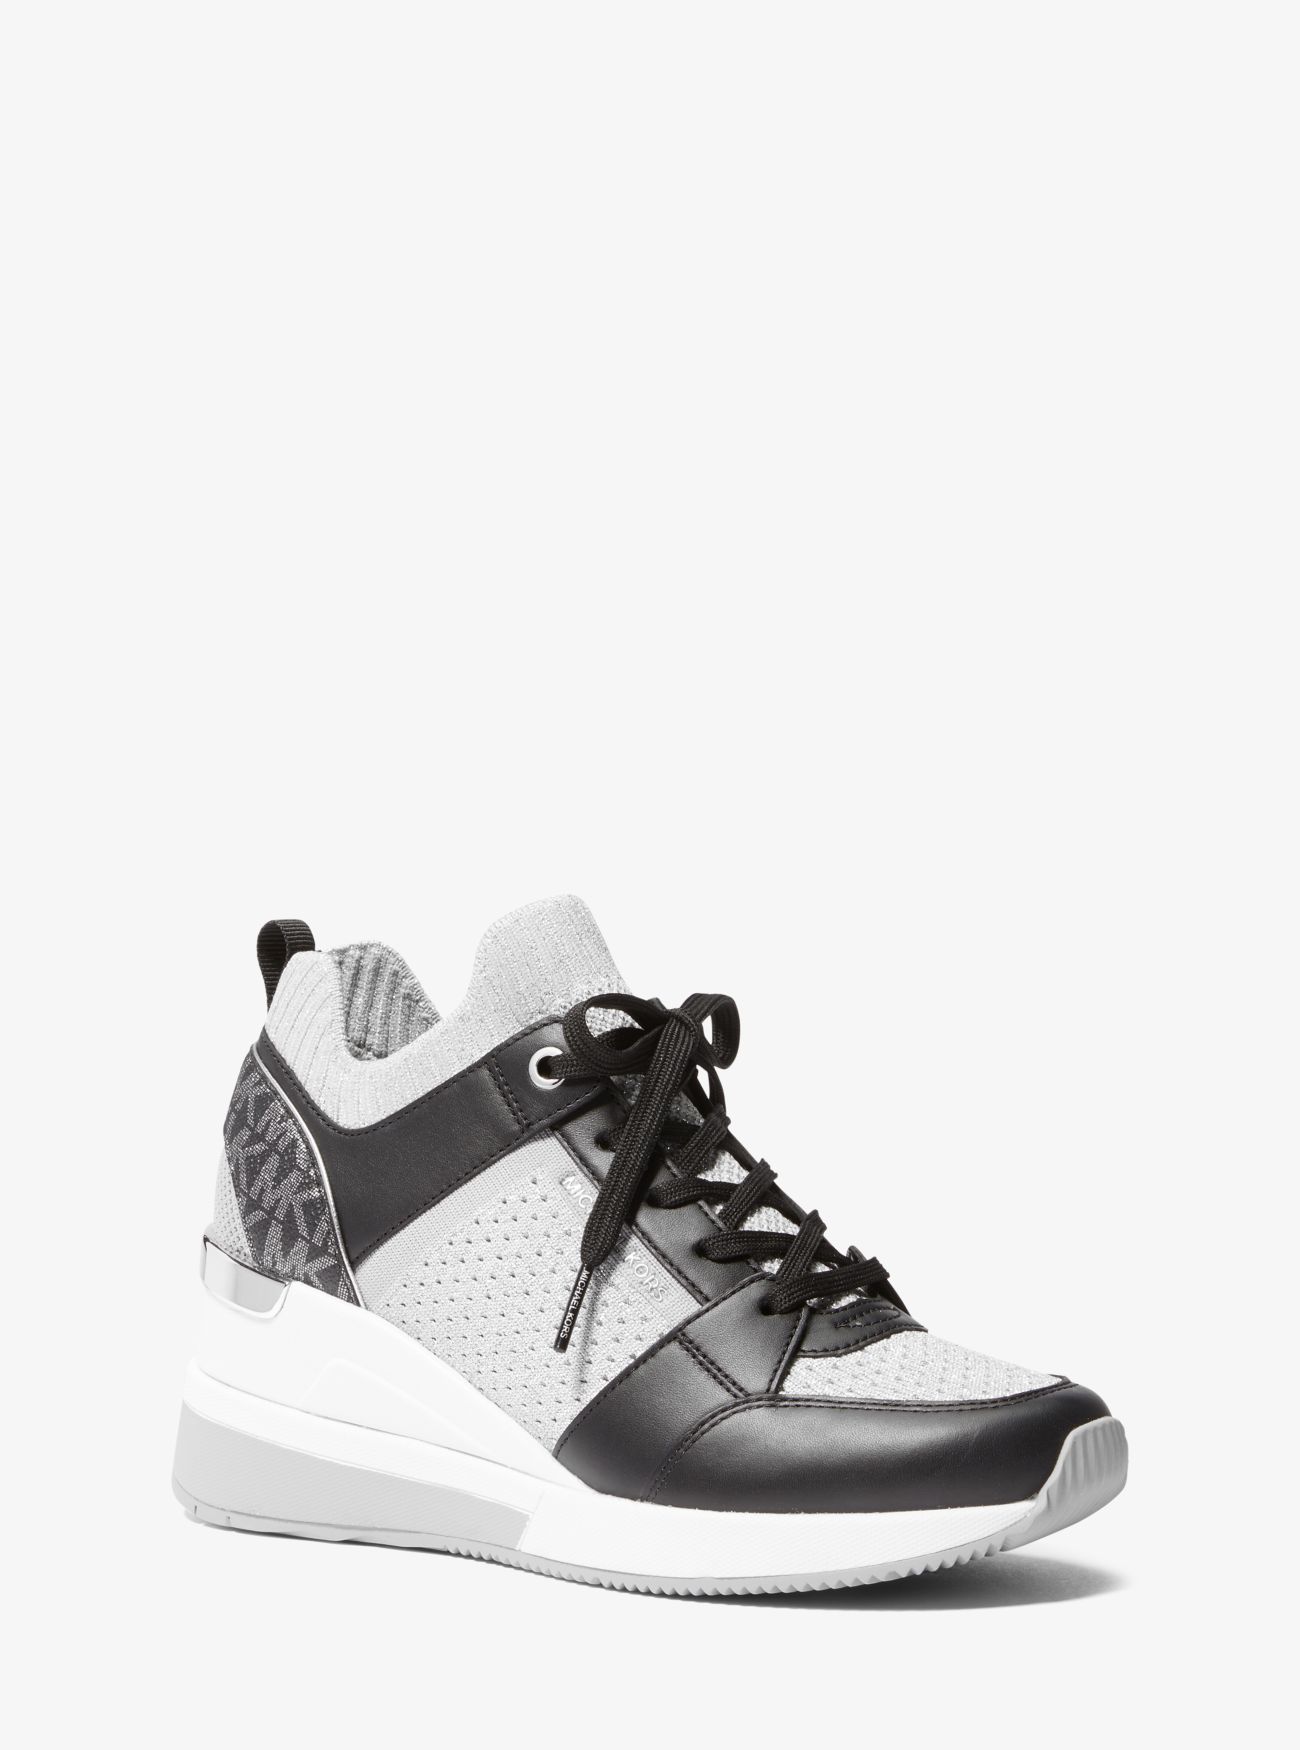 MK Georgie Stretch Knit and Leather Trainer - Black/silver - Michael Kors